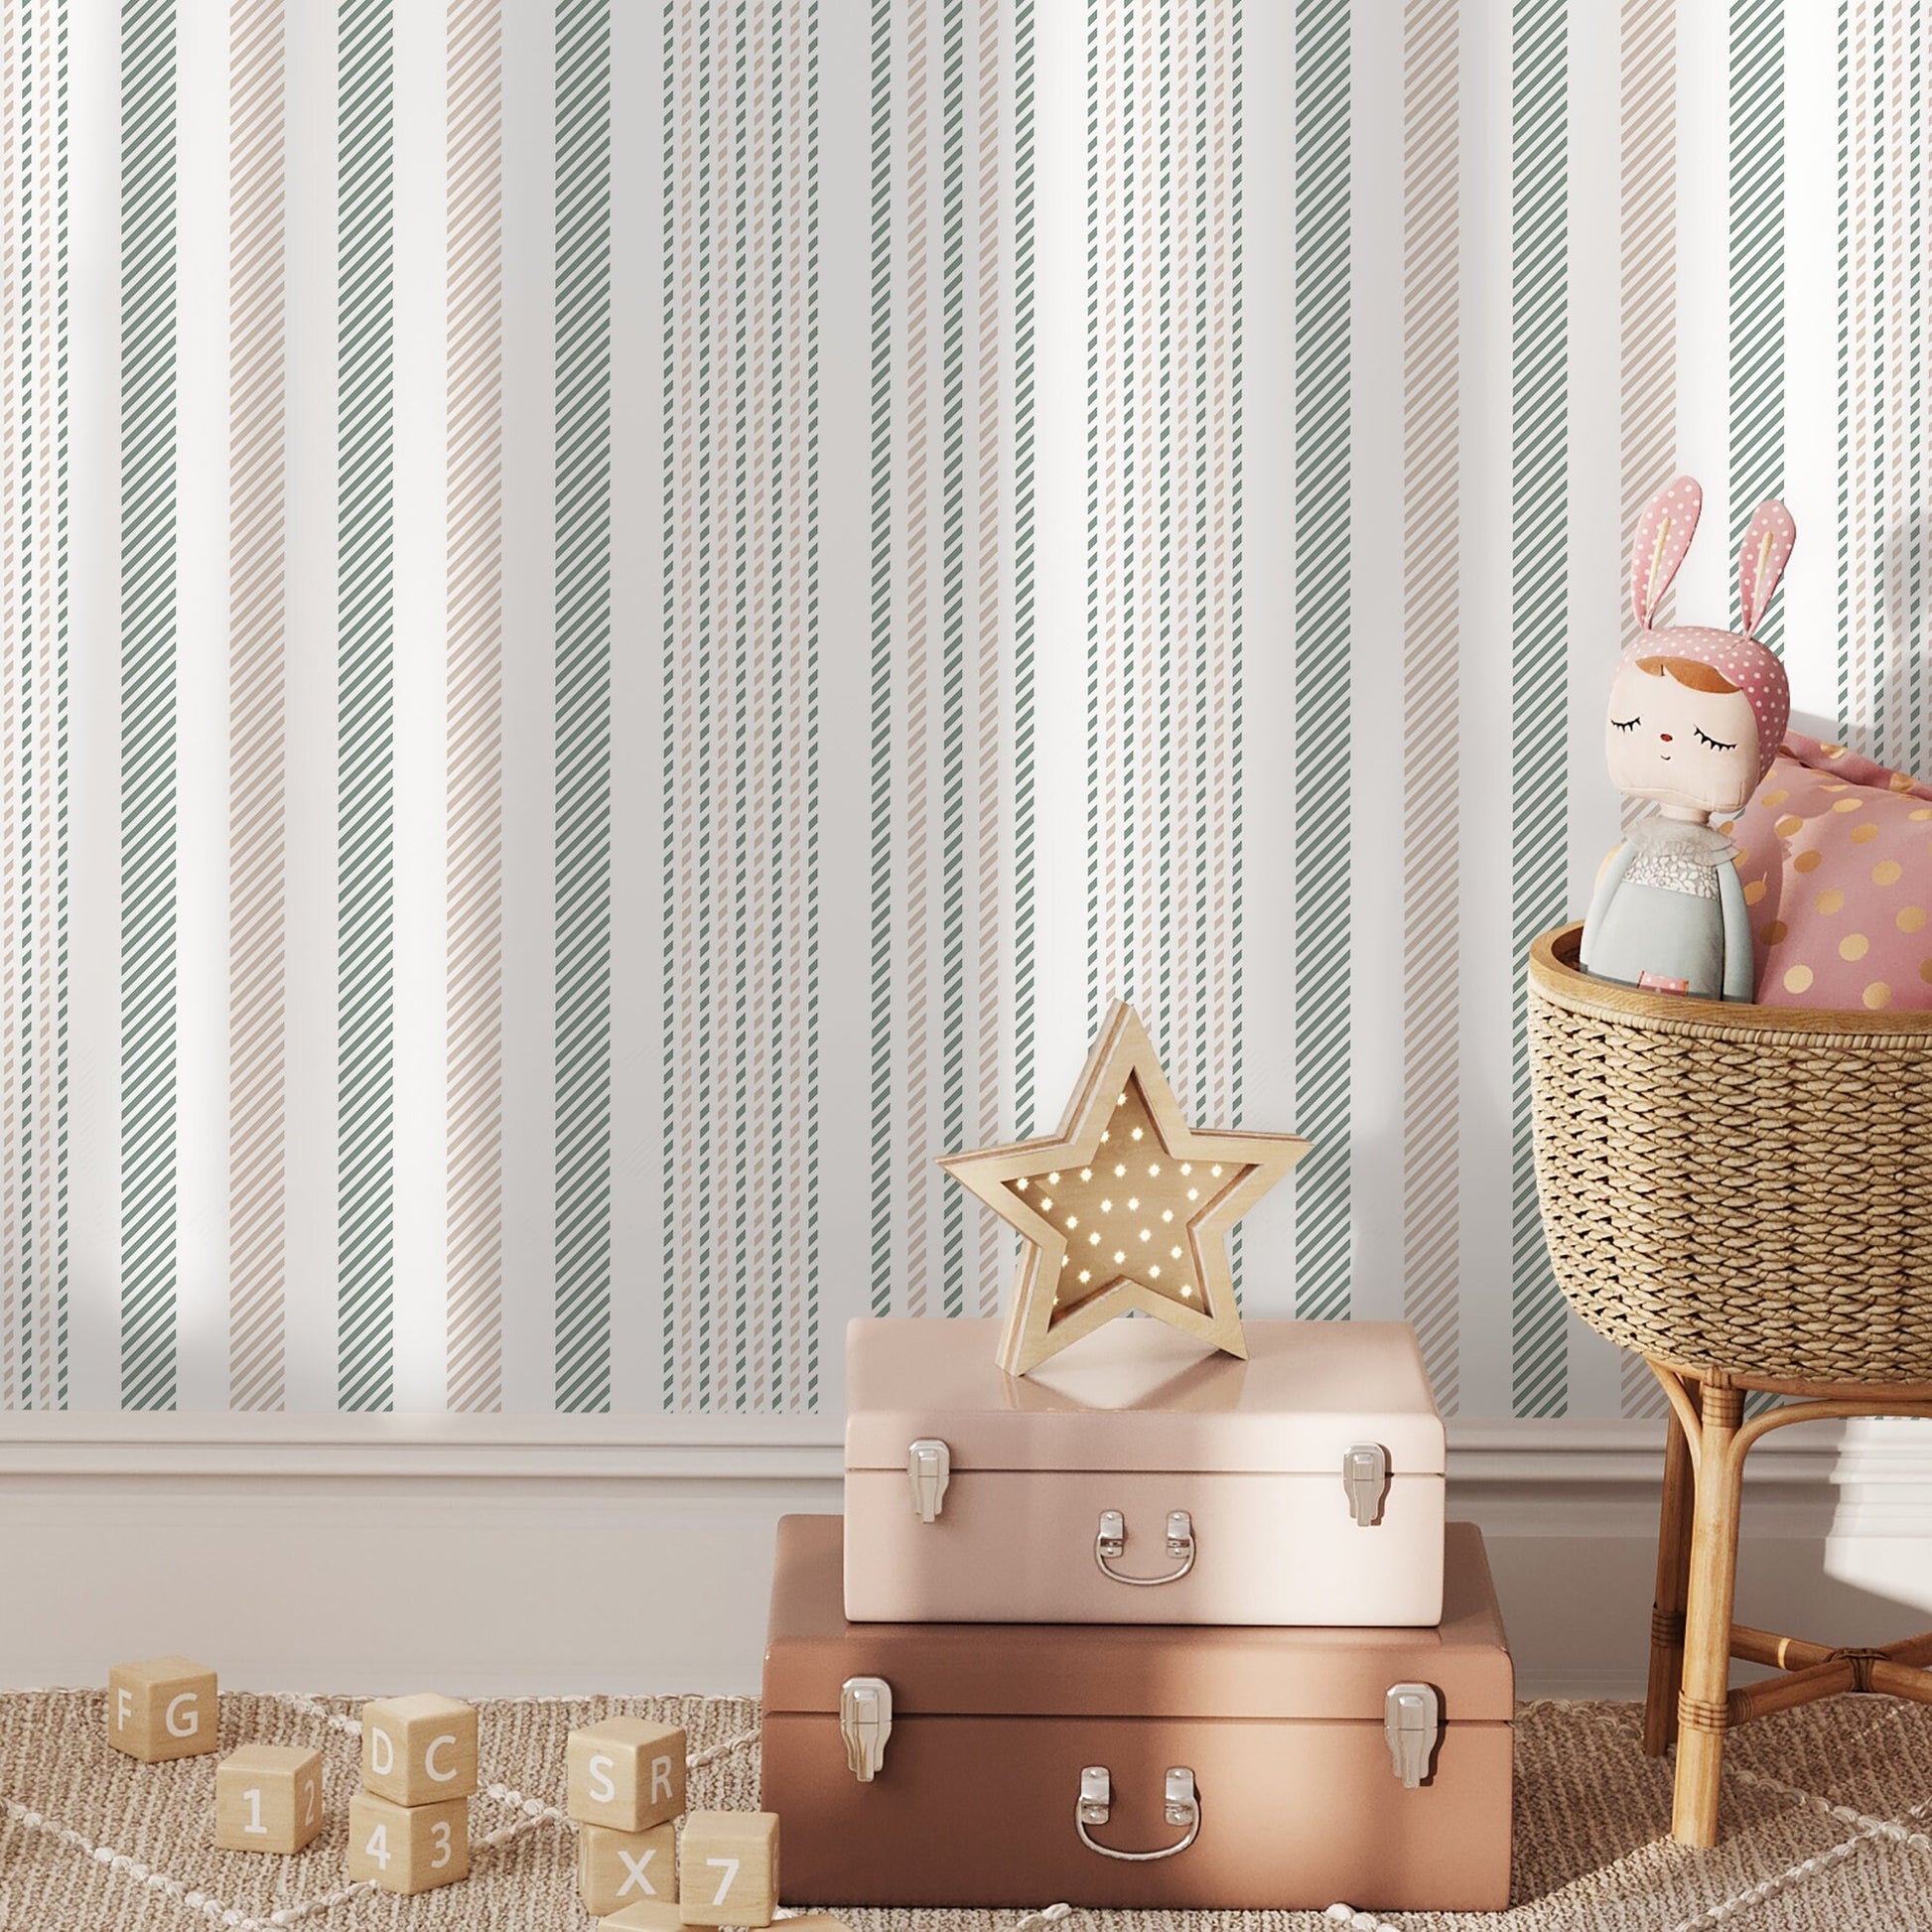 Minimalist Striped Wallpaper Farmhouse wallpaper Peel and Stick and Traditional Wallpaper - D805